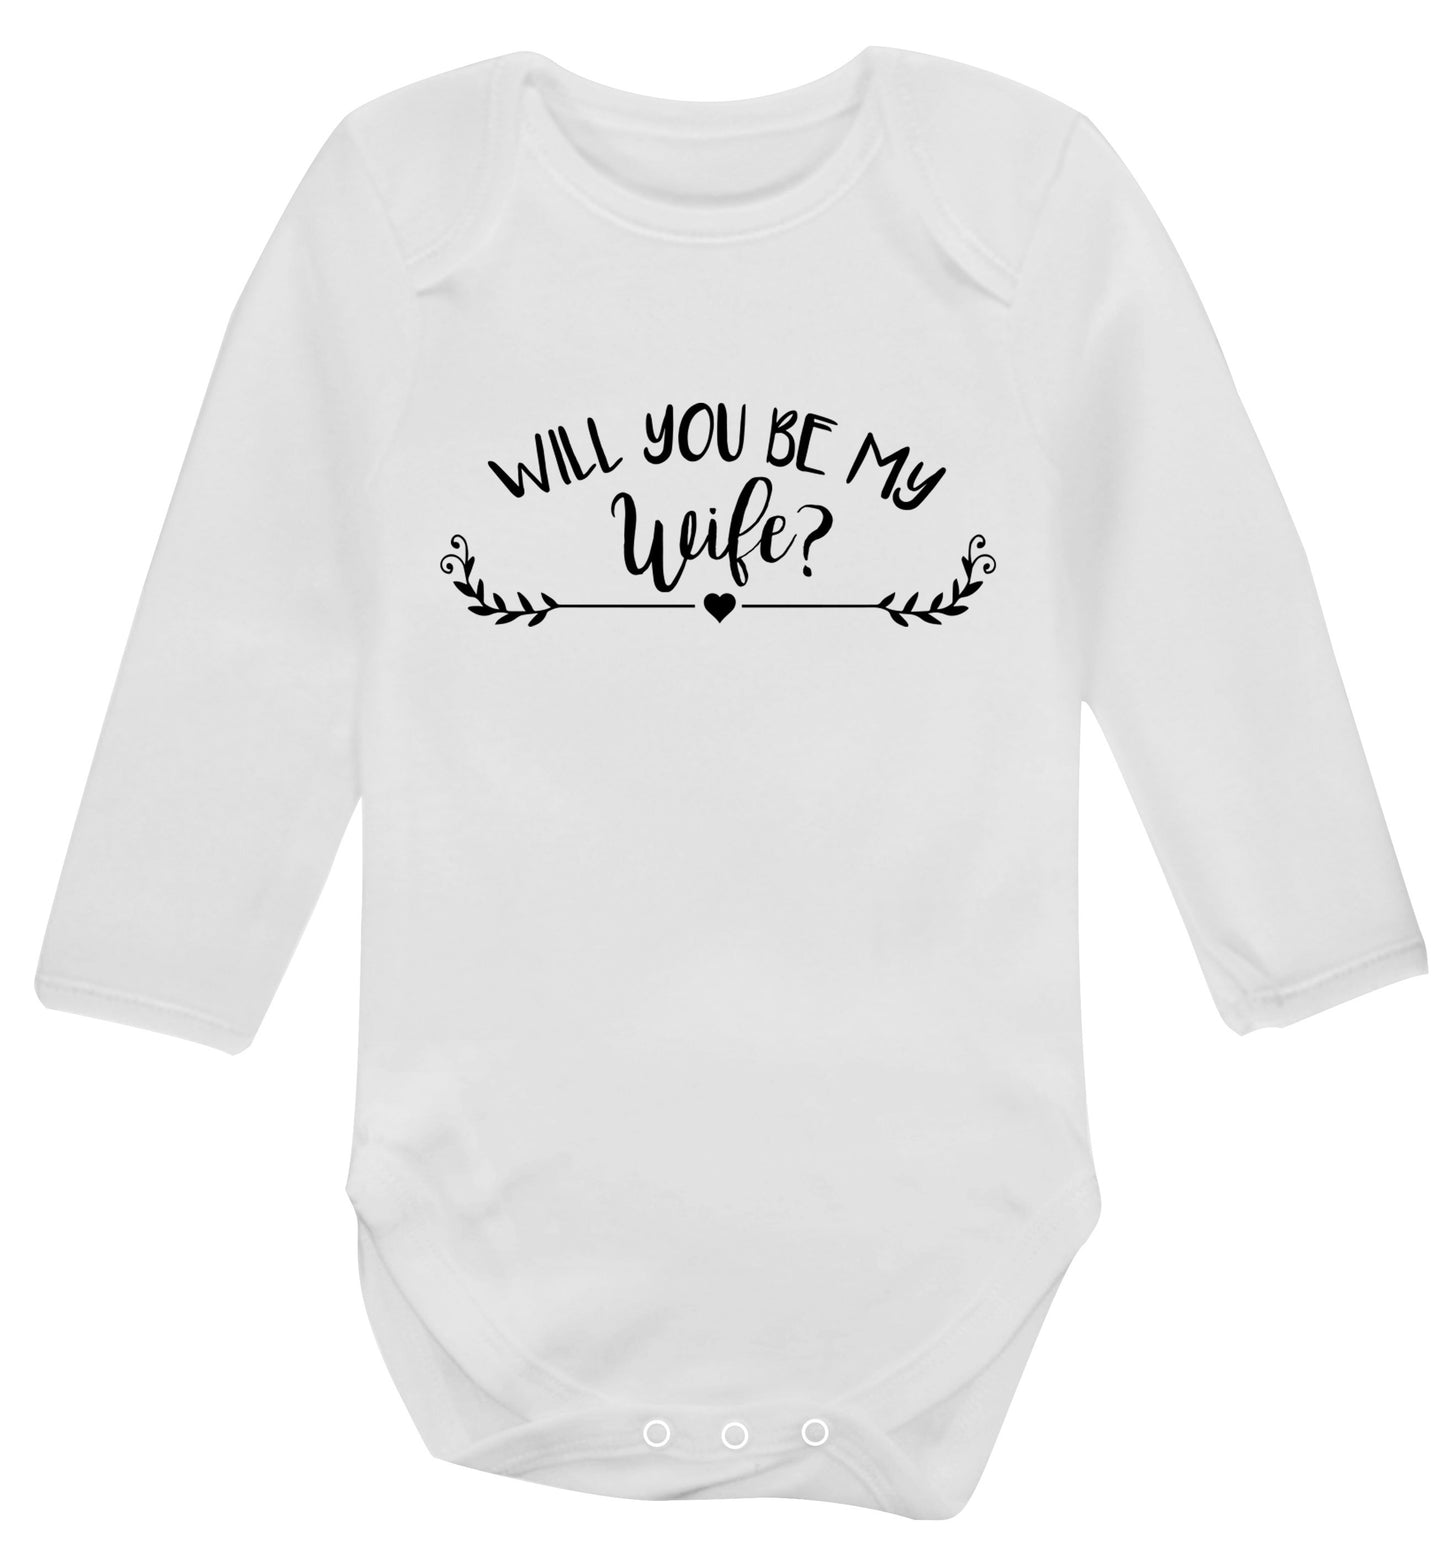 Will you be my wife? Baby Vest long sleeved white 6-12 months